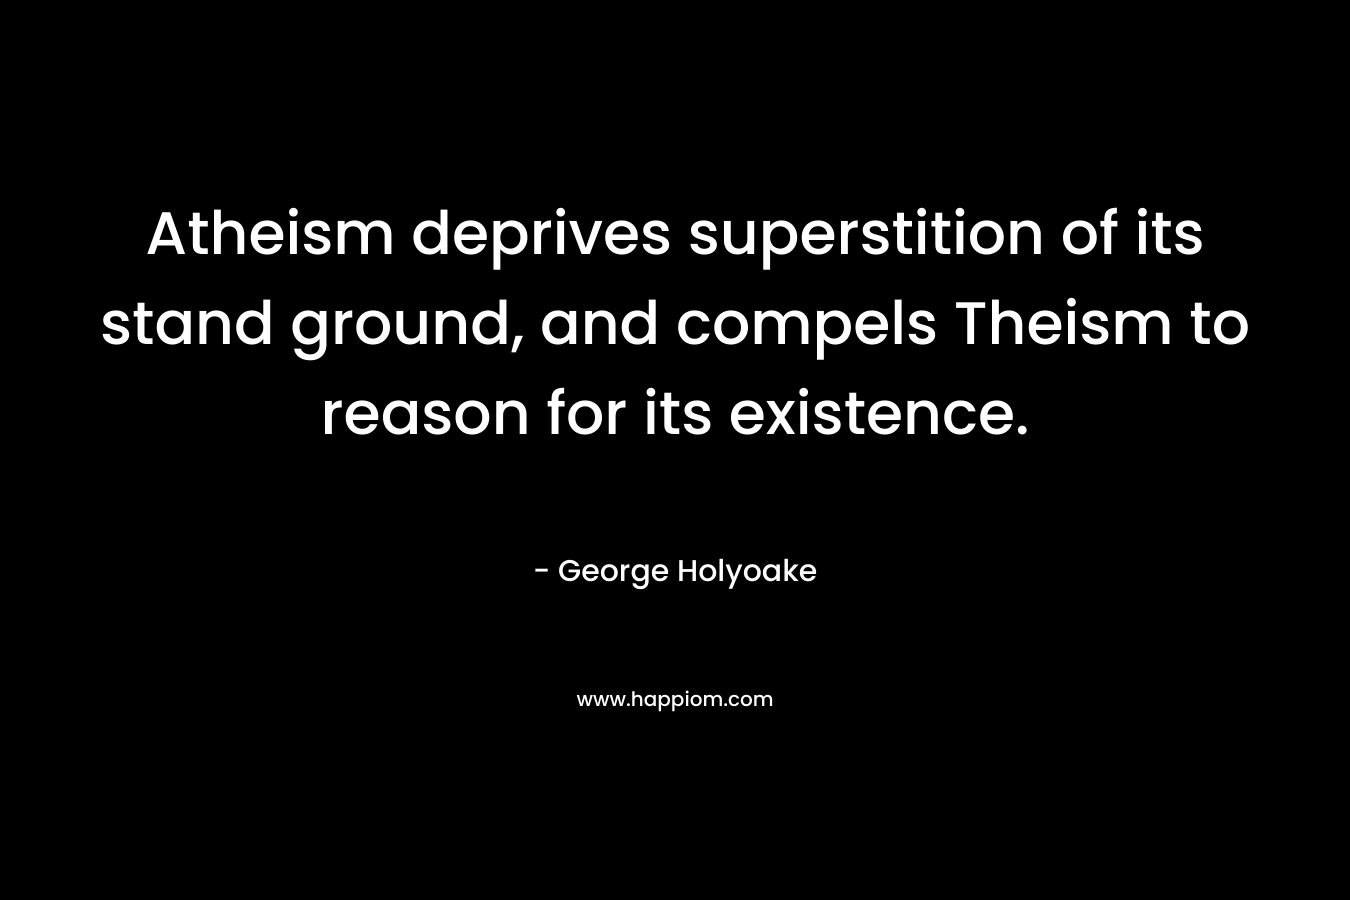 Atheism deprives superstition of its stand ground, and compels Theism to reason for its existence. – George Holyoake